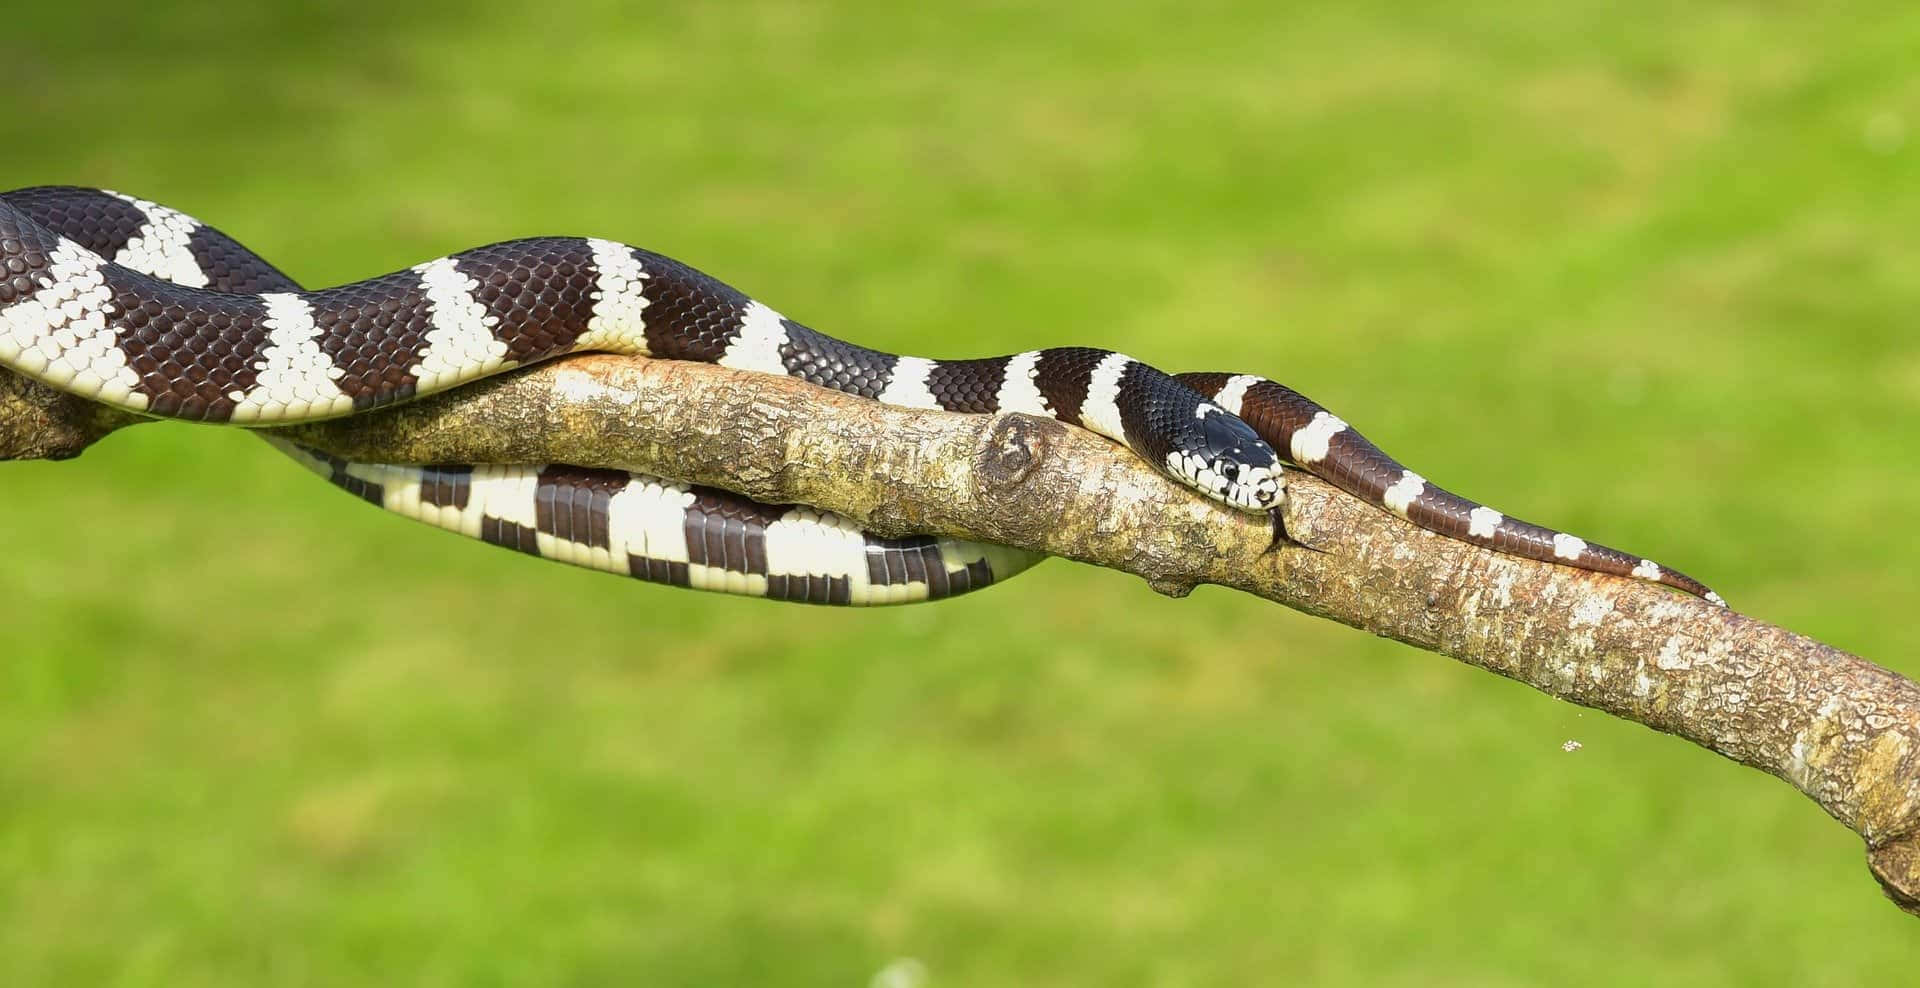 "The Majestic King Snake"